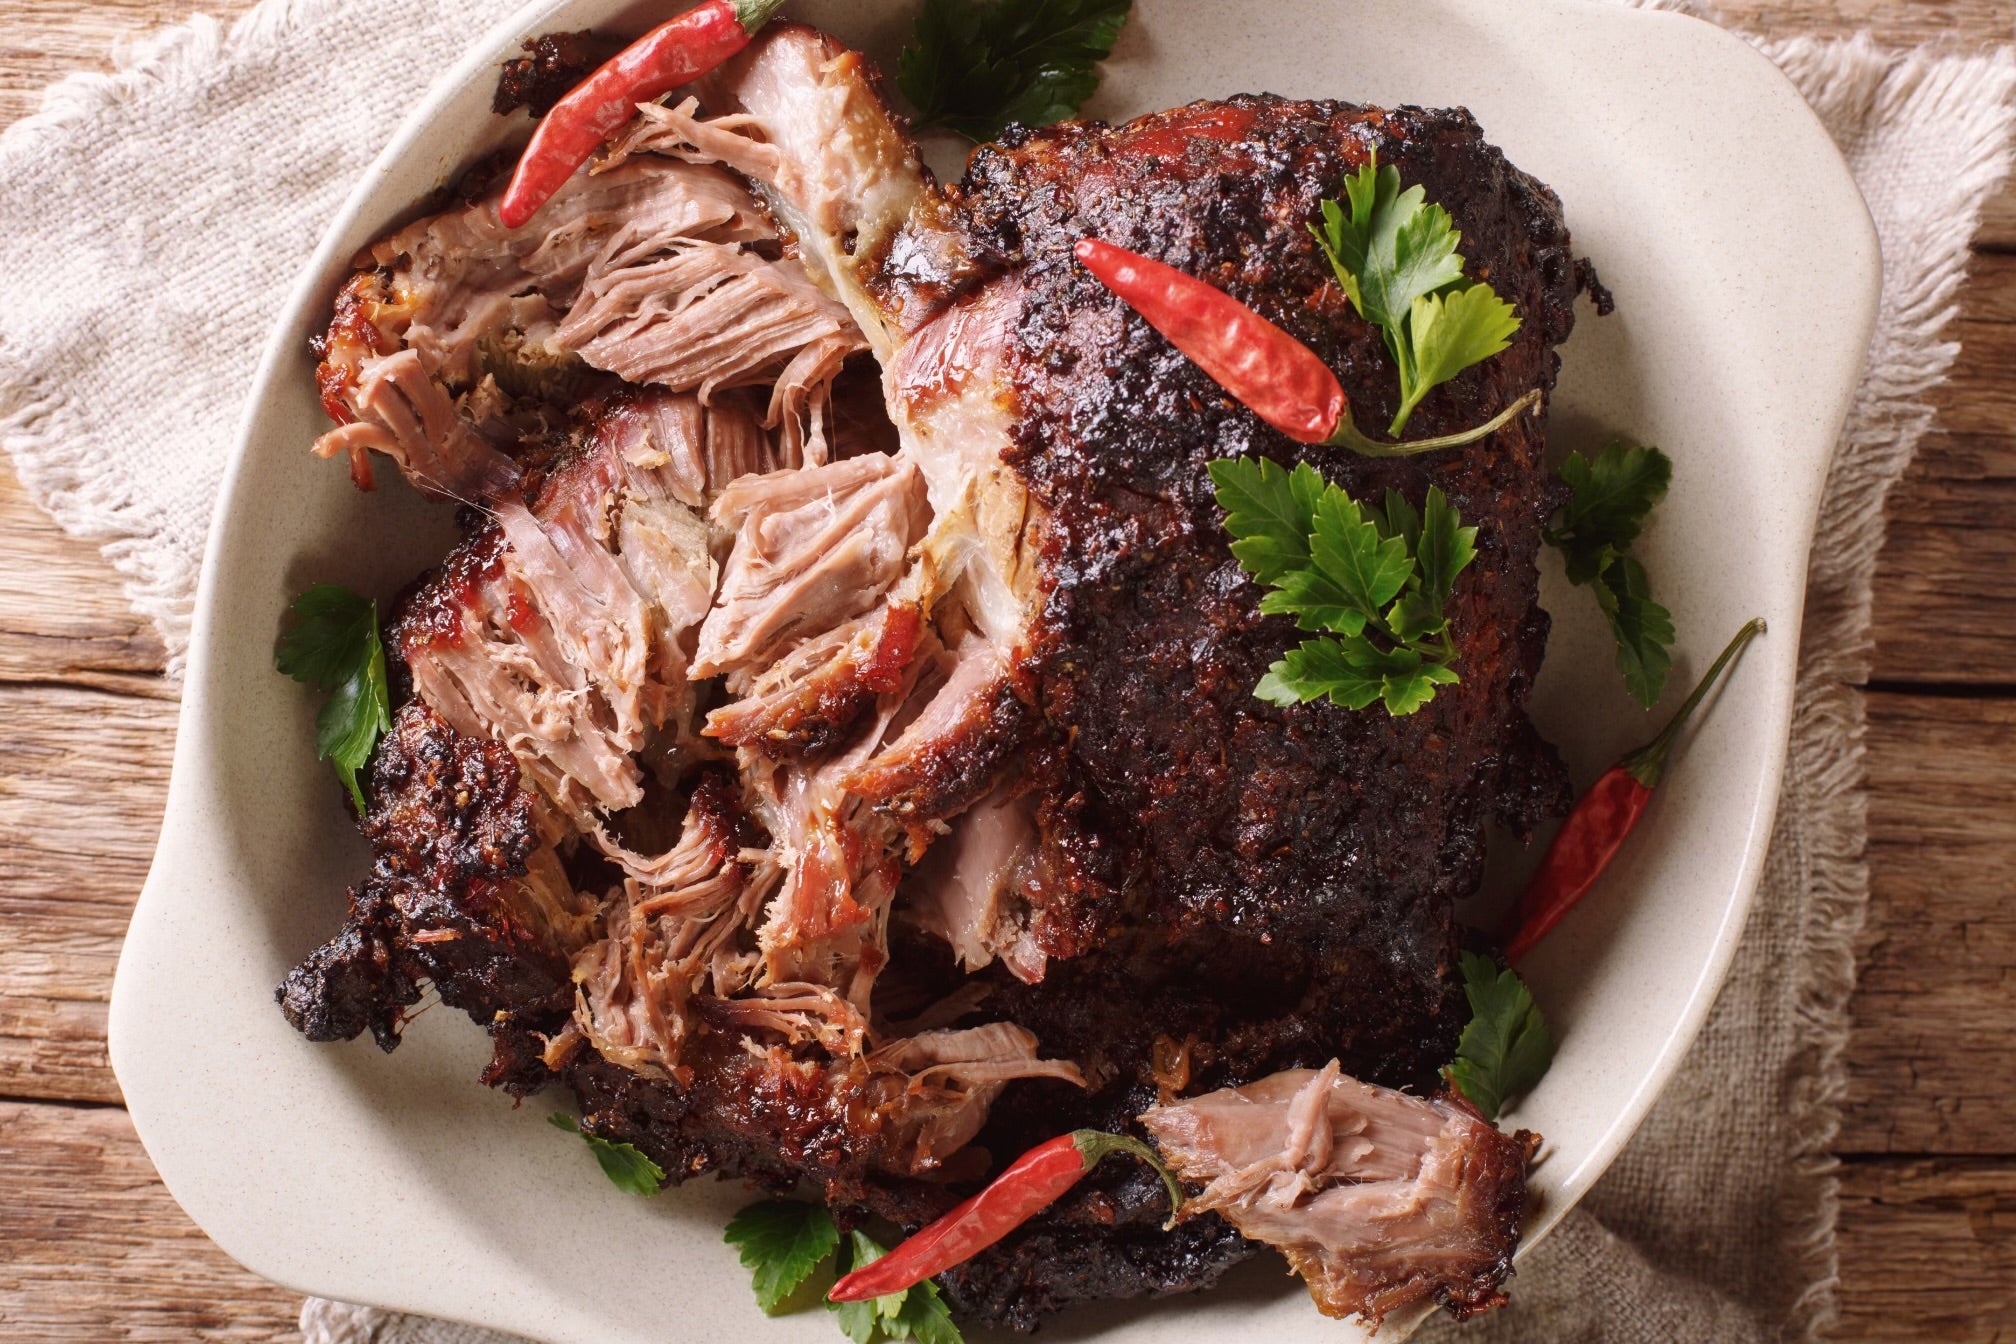 Puerto Rican classic, roasted pernil (roasted pork shoulder)